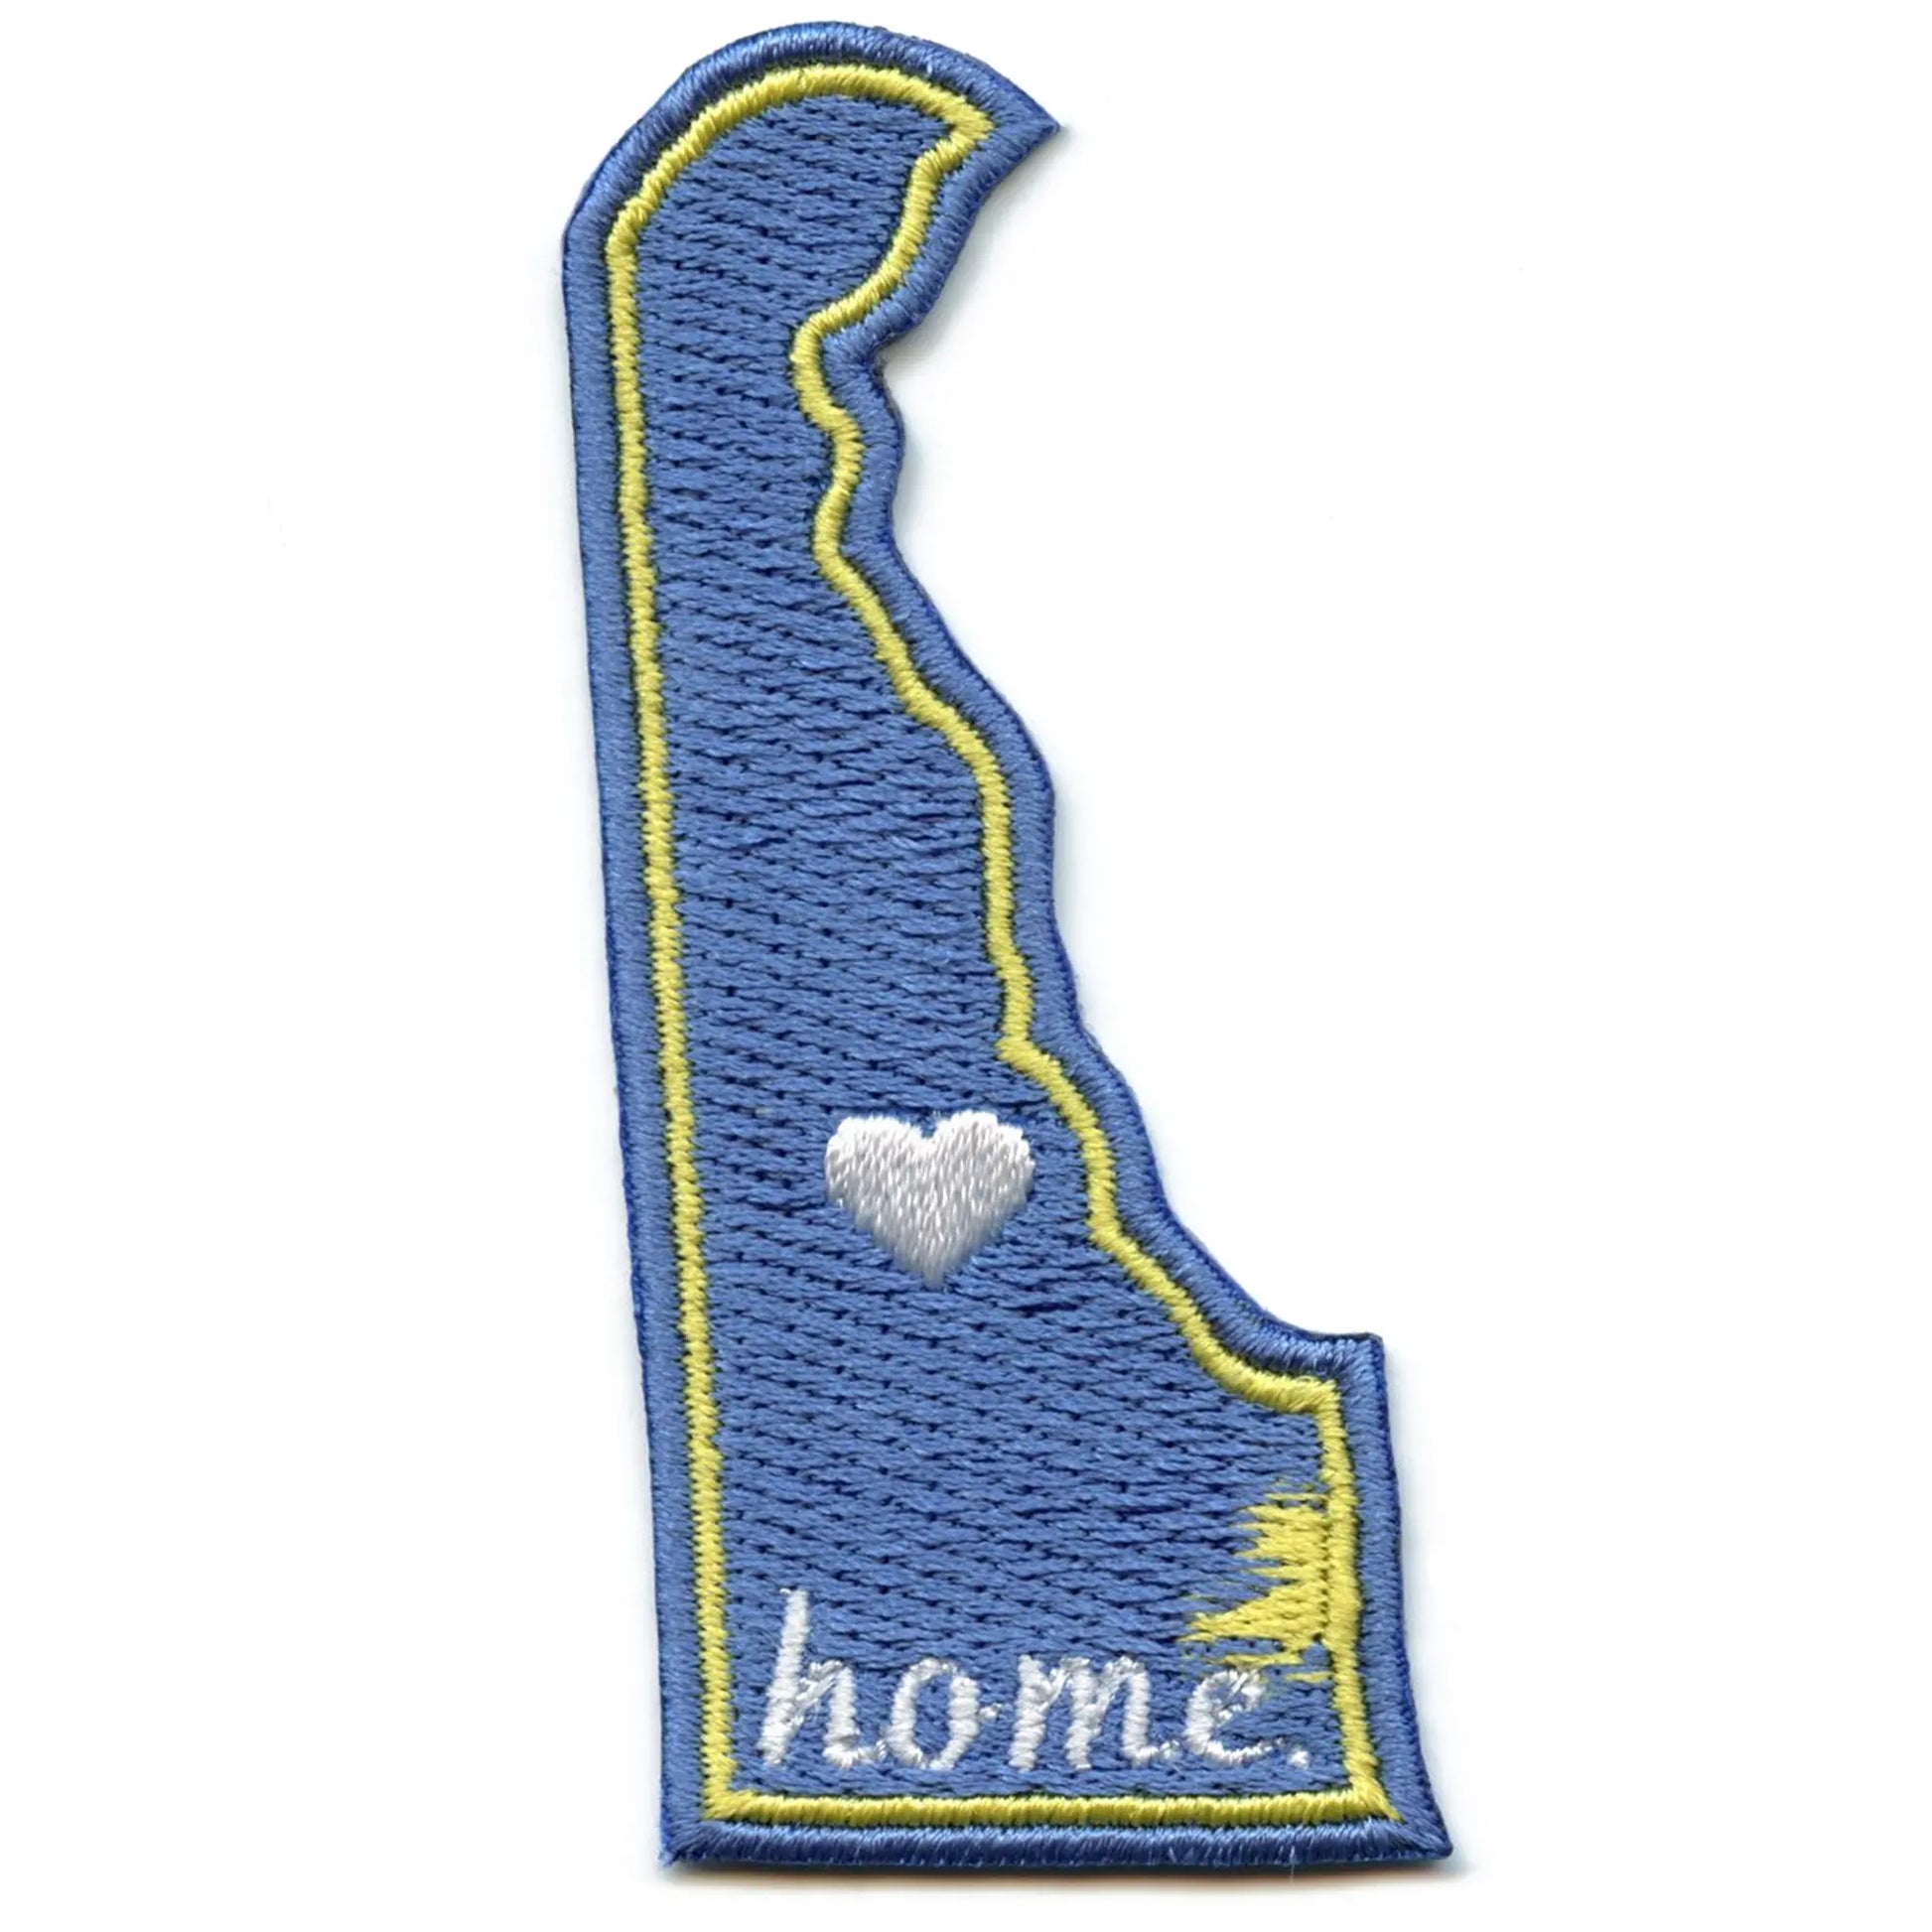 Delaware Home State Patch Embroidered Iron On 